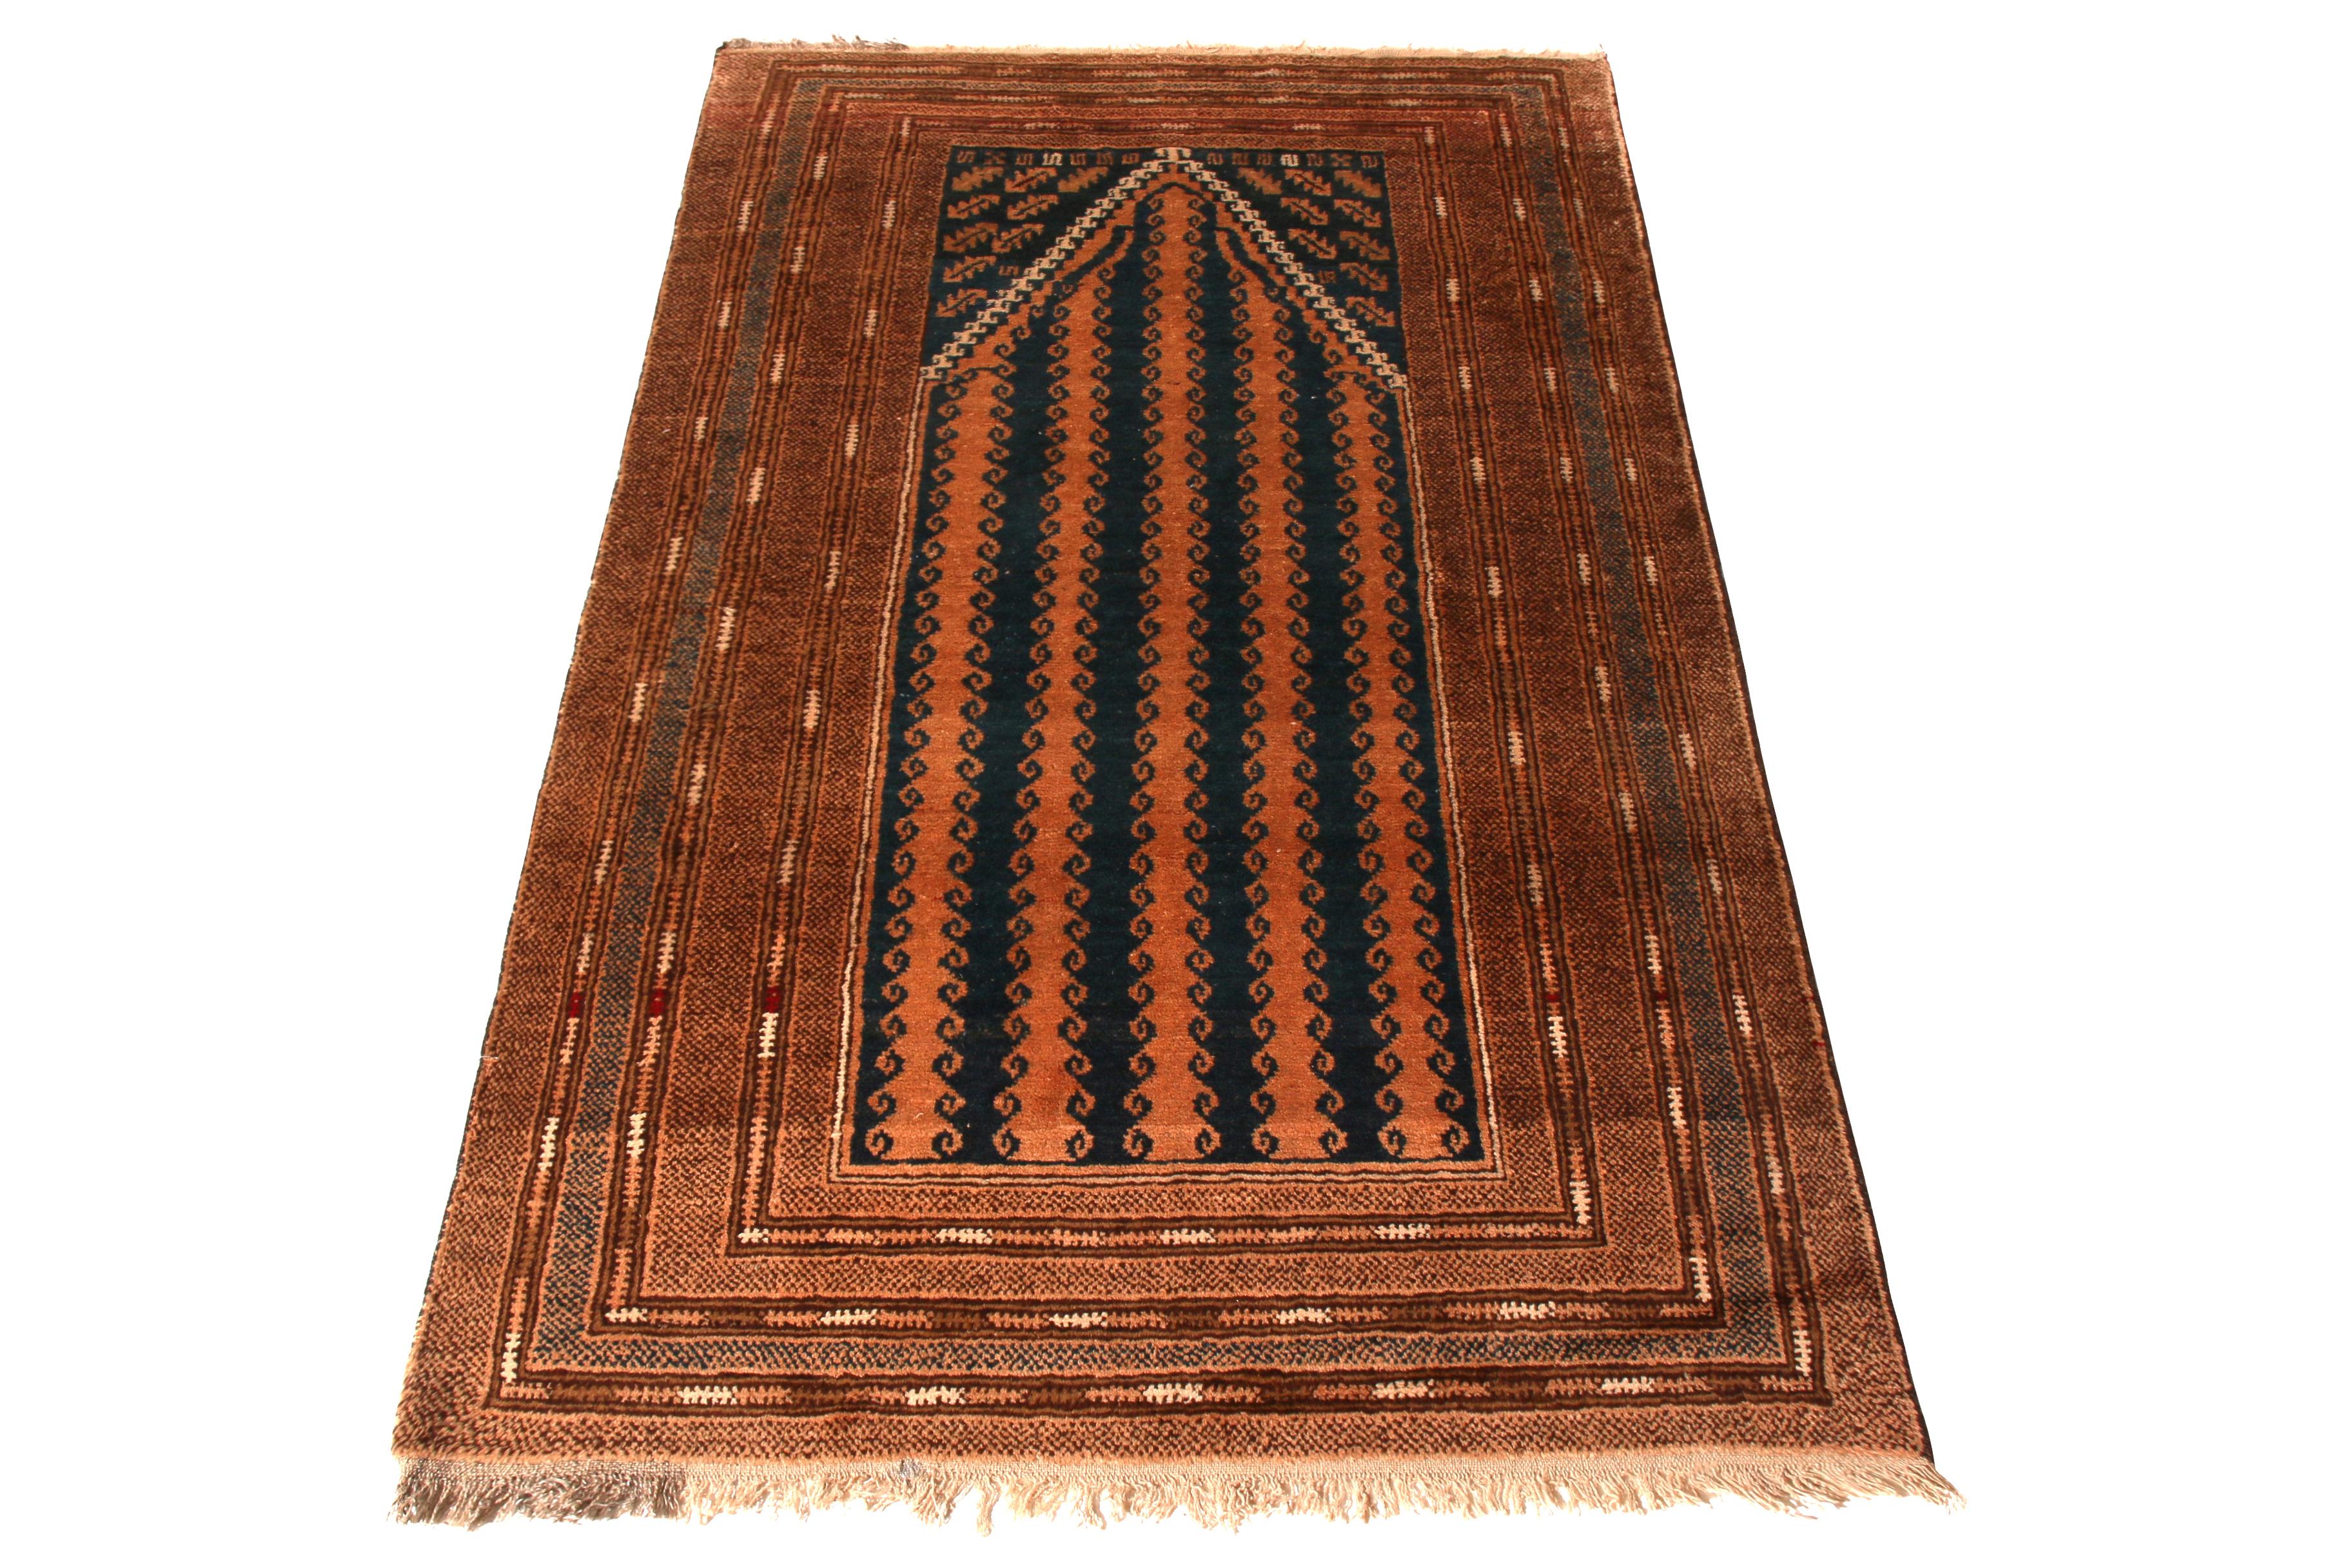 Hand knotted in wool originating from the Baluch tribal weavers circa 1950-1960, this midcentury vintage Persian rug enjoys a unique colorway approach to the venerated Mihrab pattern, both in the peach-orange accent as well as the remarkably subtle